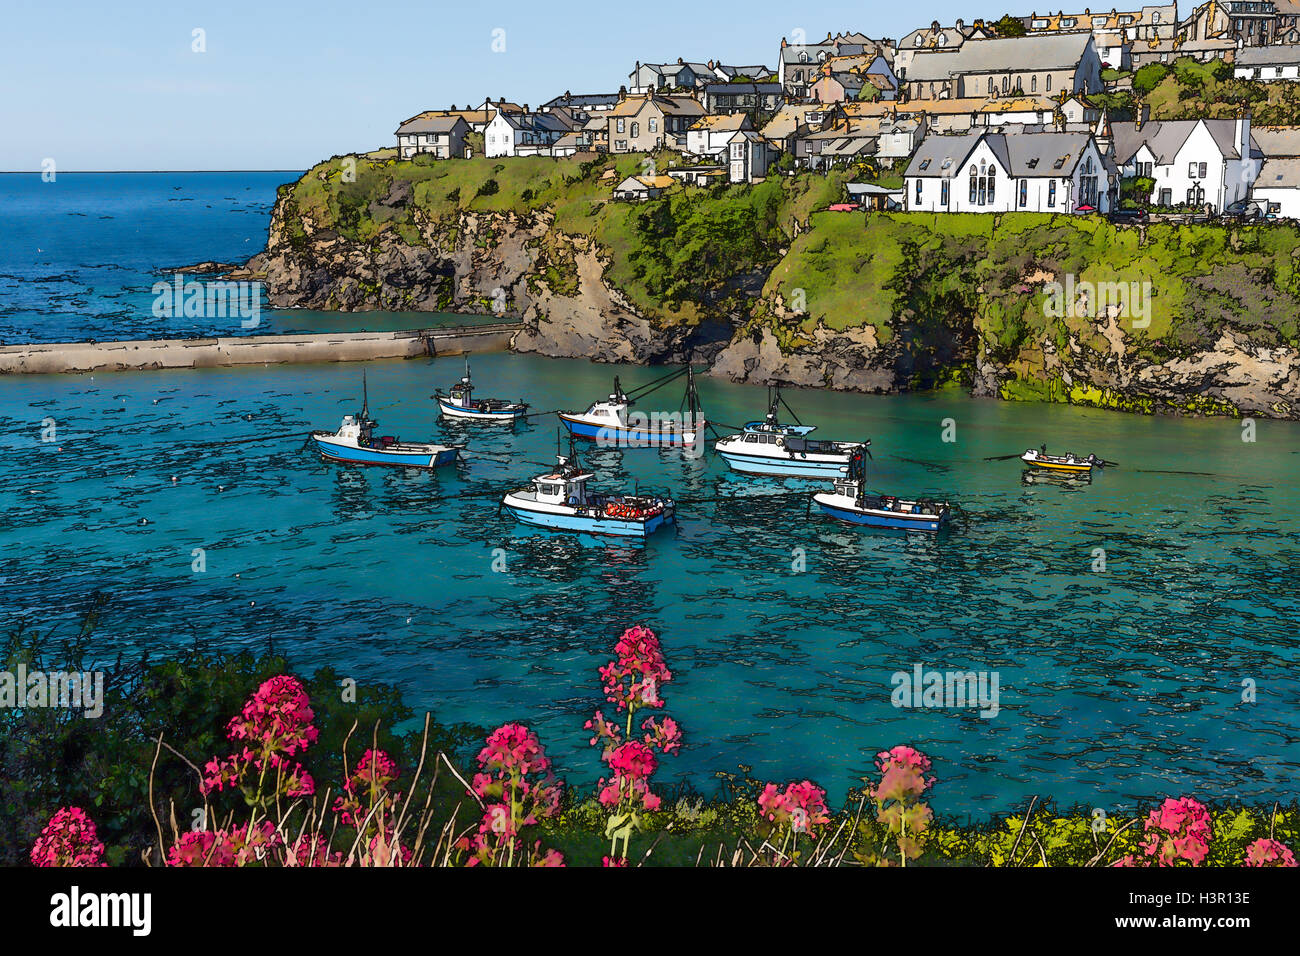 Boats in Port Isaac harbour Cornwall England UK with blue sea and boats in summer illustration like cartoon effect Stock Photo